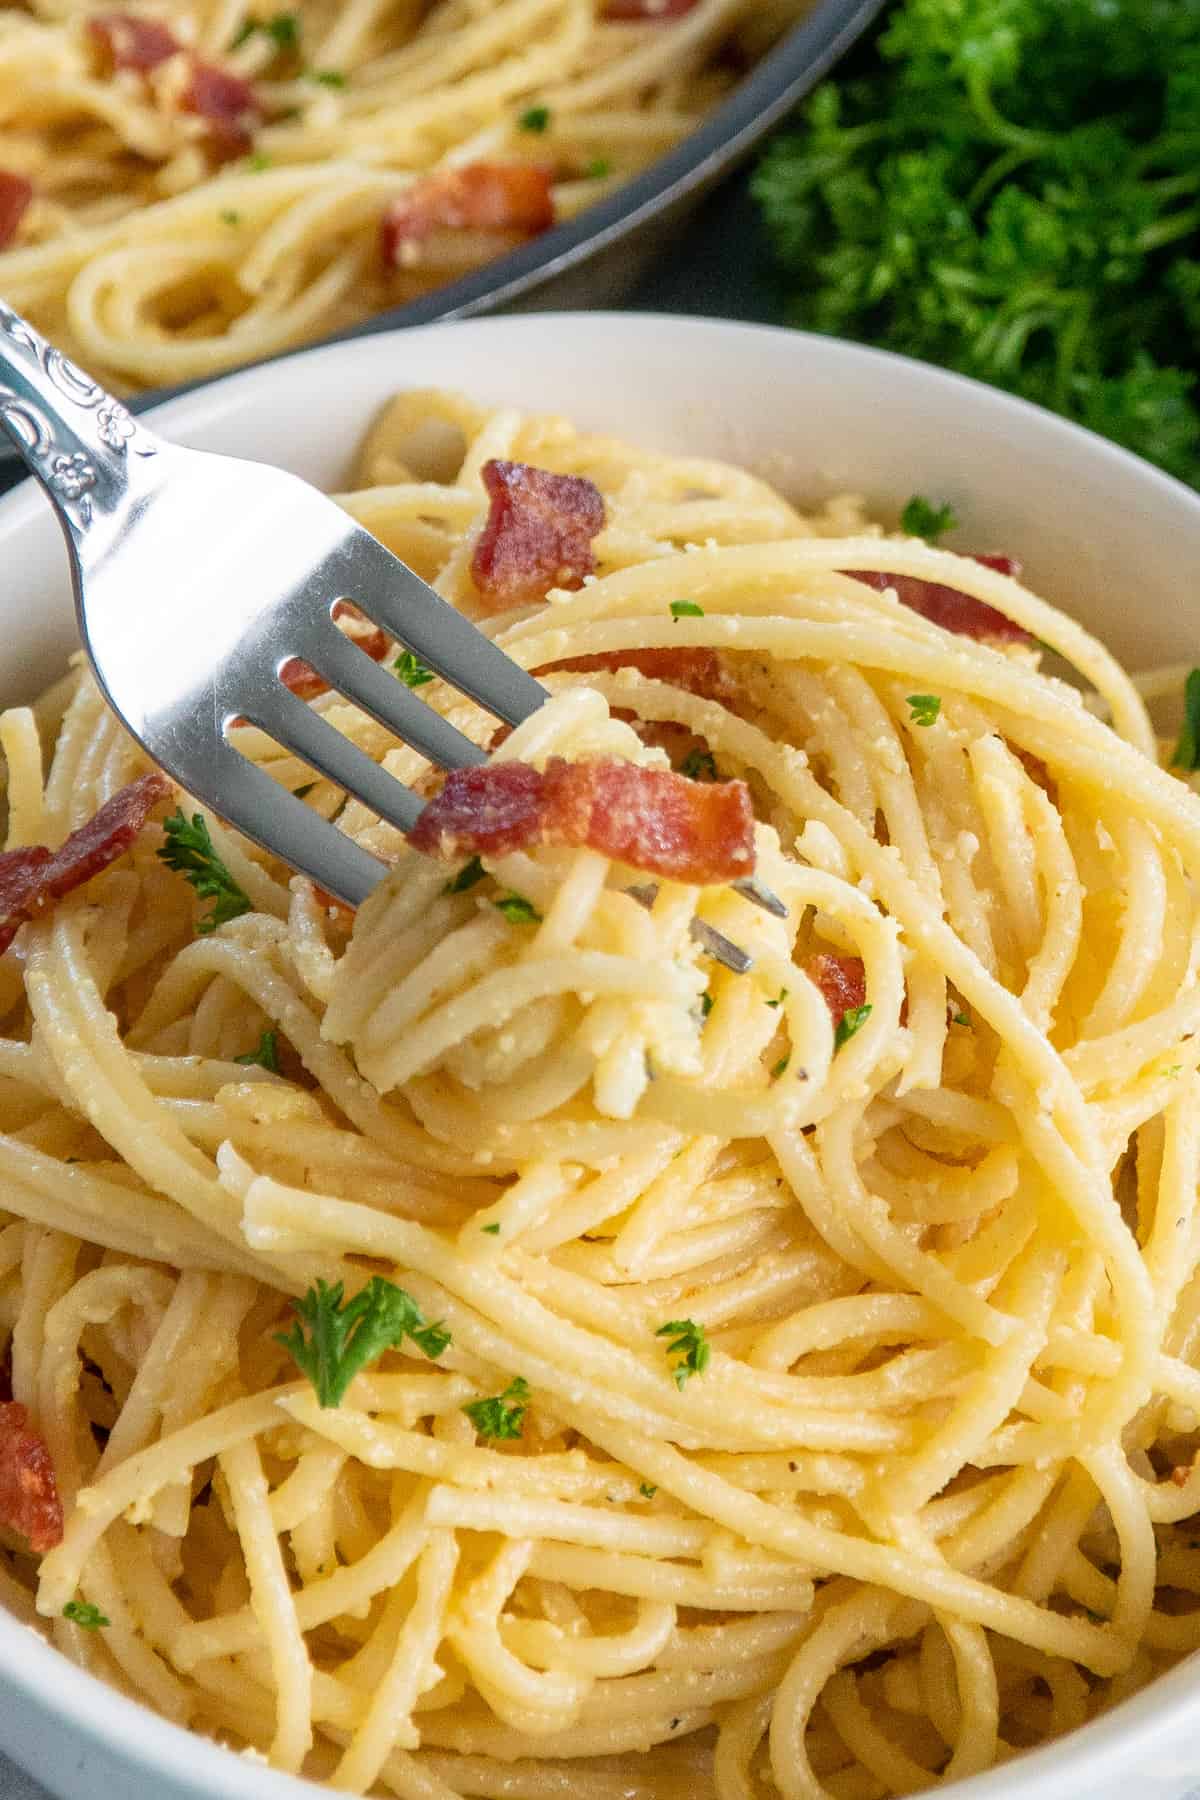 A fork with a bite of spaghetti carbonara.